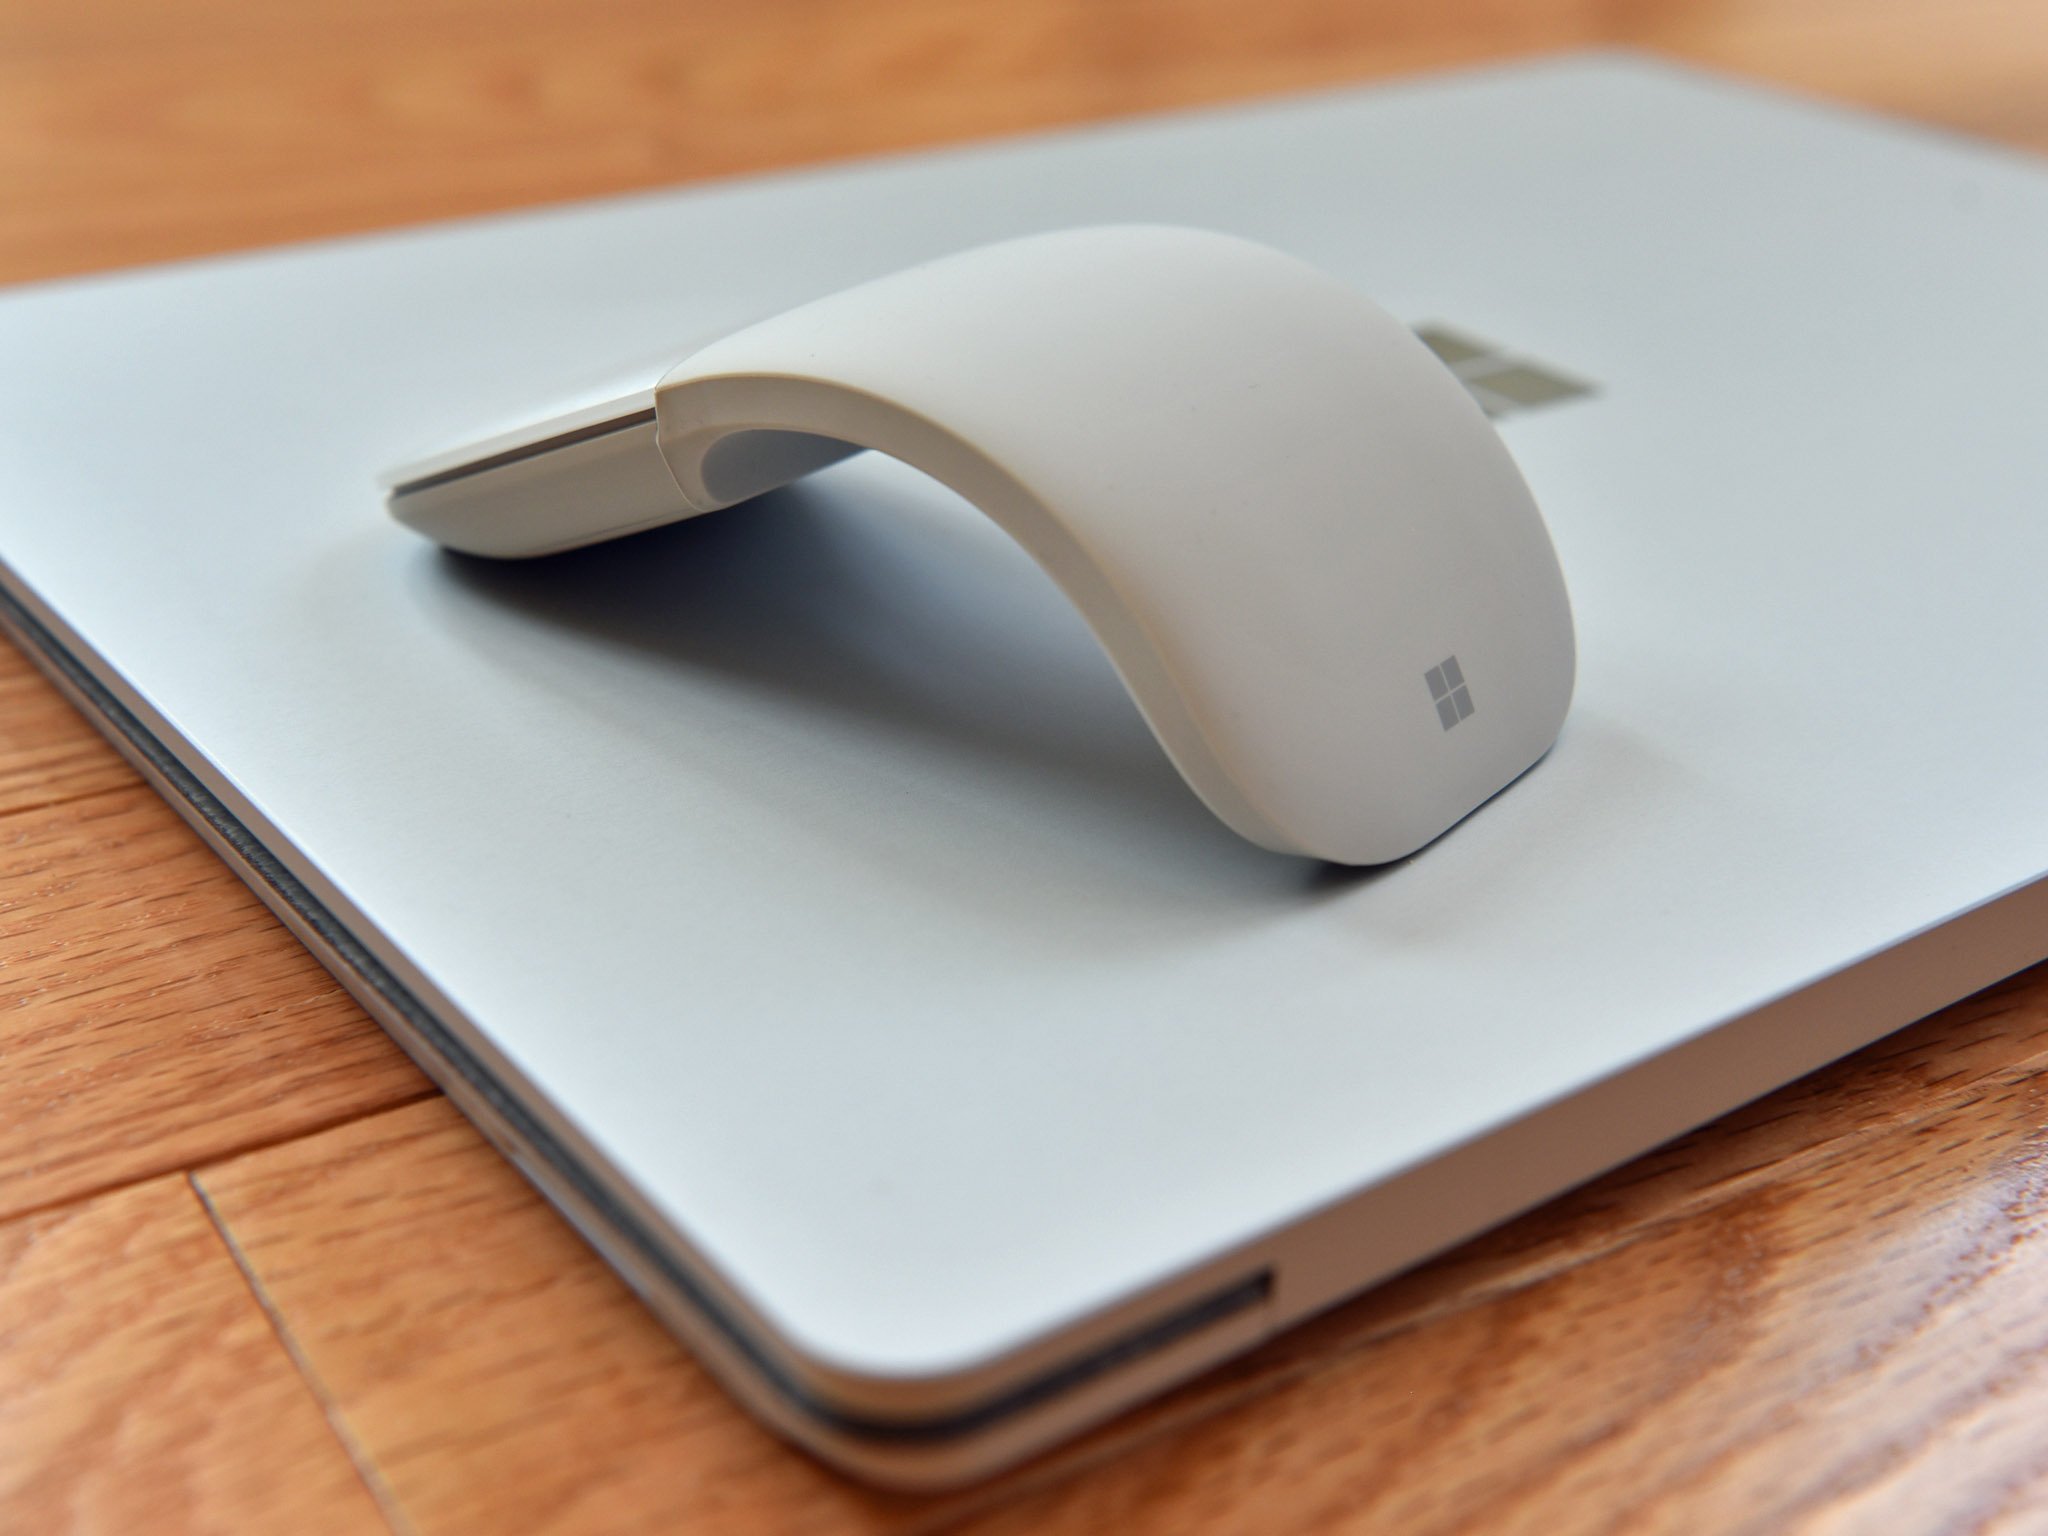 Surface mouse. MACBOOK Pro with Mouse. Designer Mouse. Microsoft surface Maus qiyməti. Surface Mouse point.